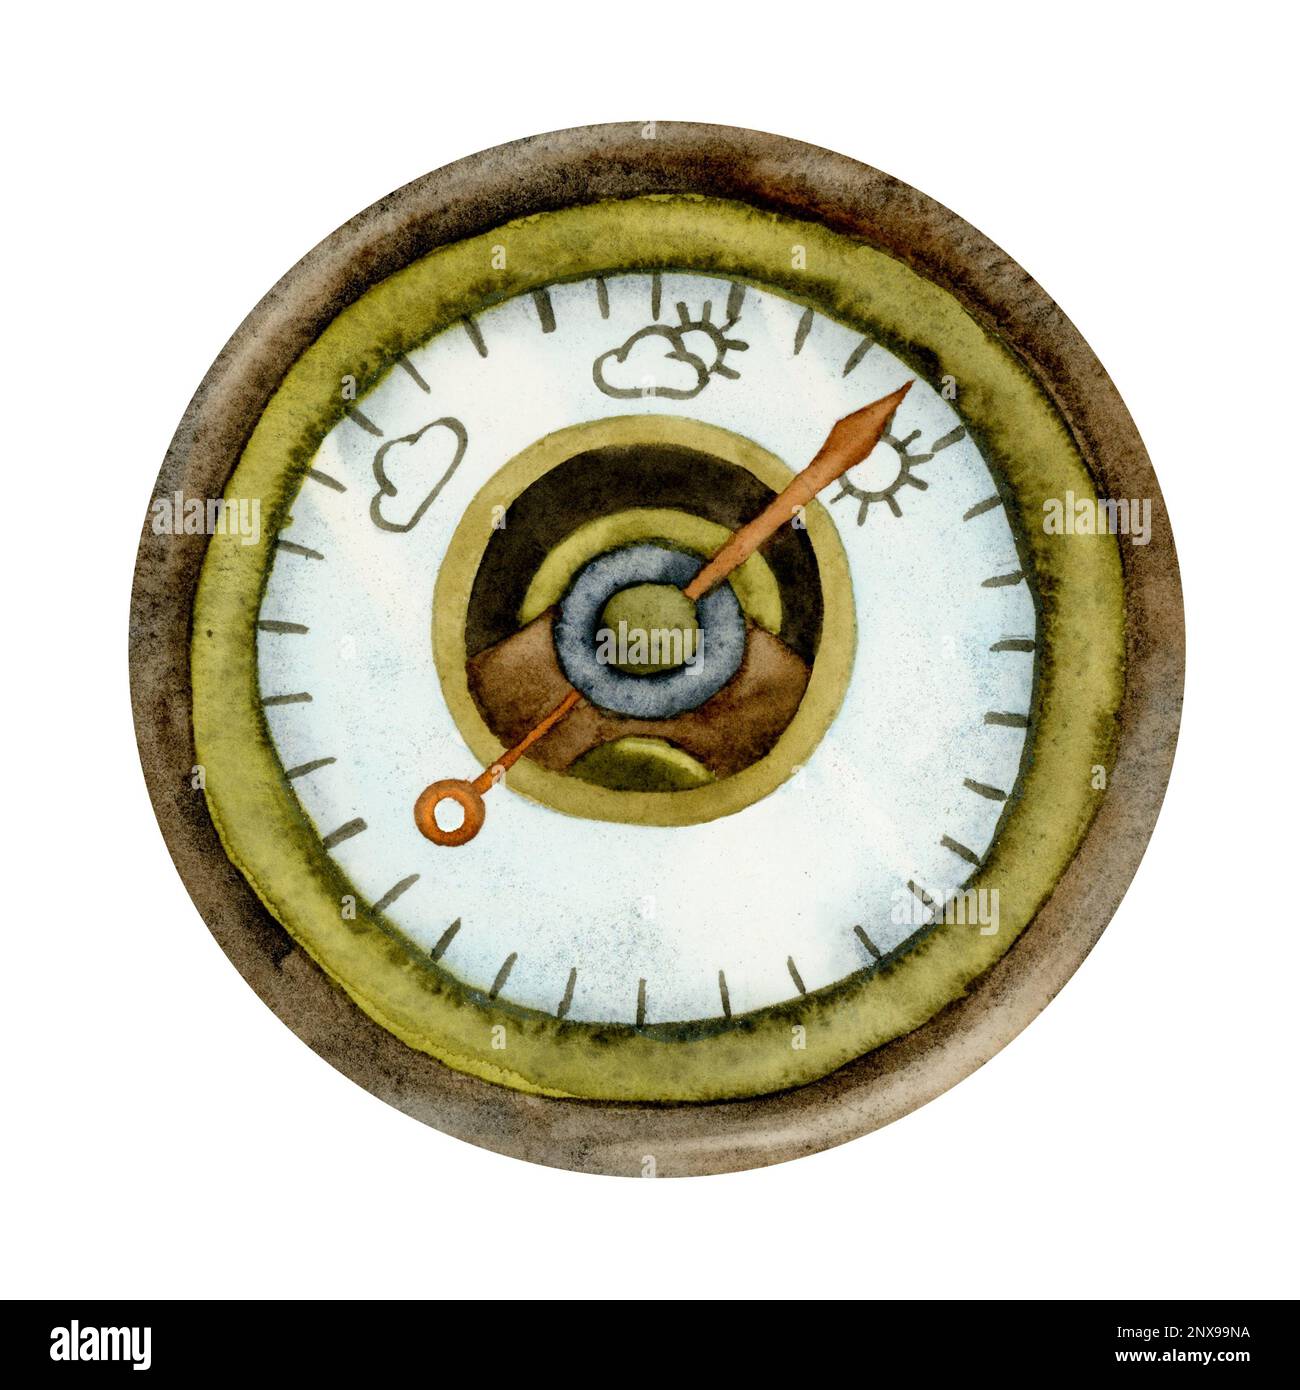 Weather Gauge In An Animated Illustration Background, 3d Illustration Of A  Barometer With Needdle Pointing A Storm Pictogram, Horizontal Image, Hd  Photography Photo Background Image And Wallpaper for Free Download